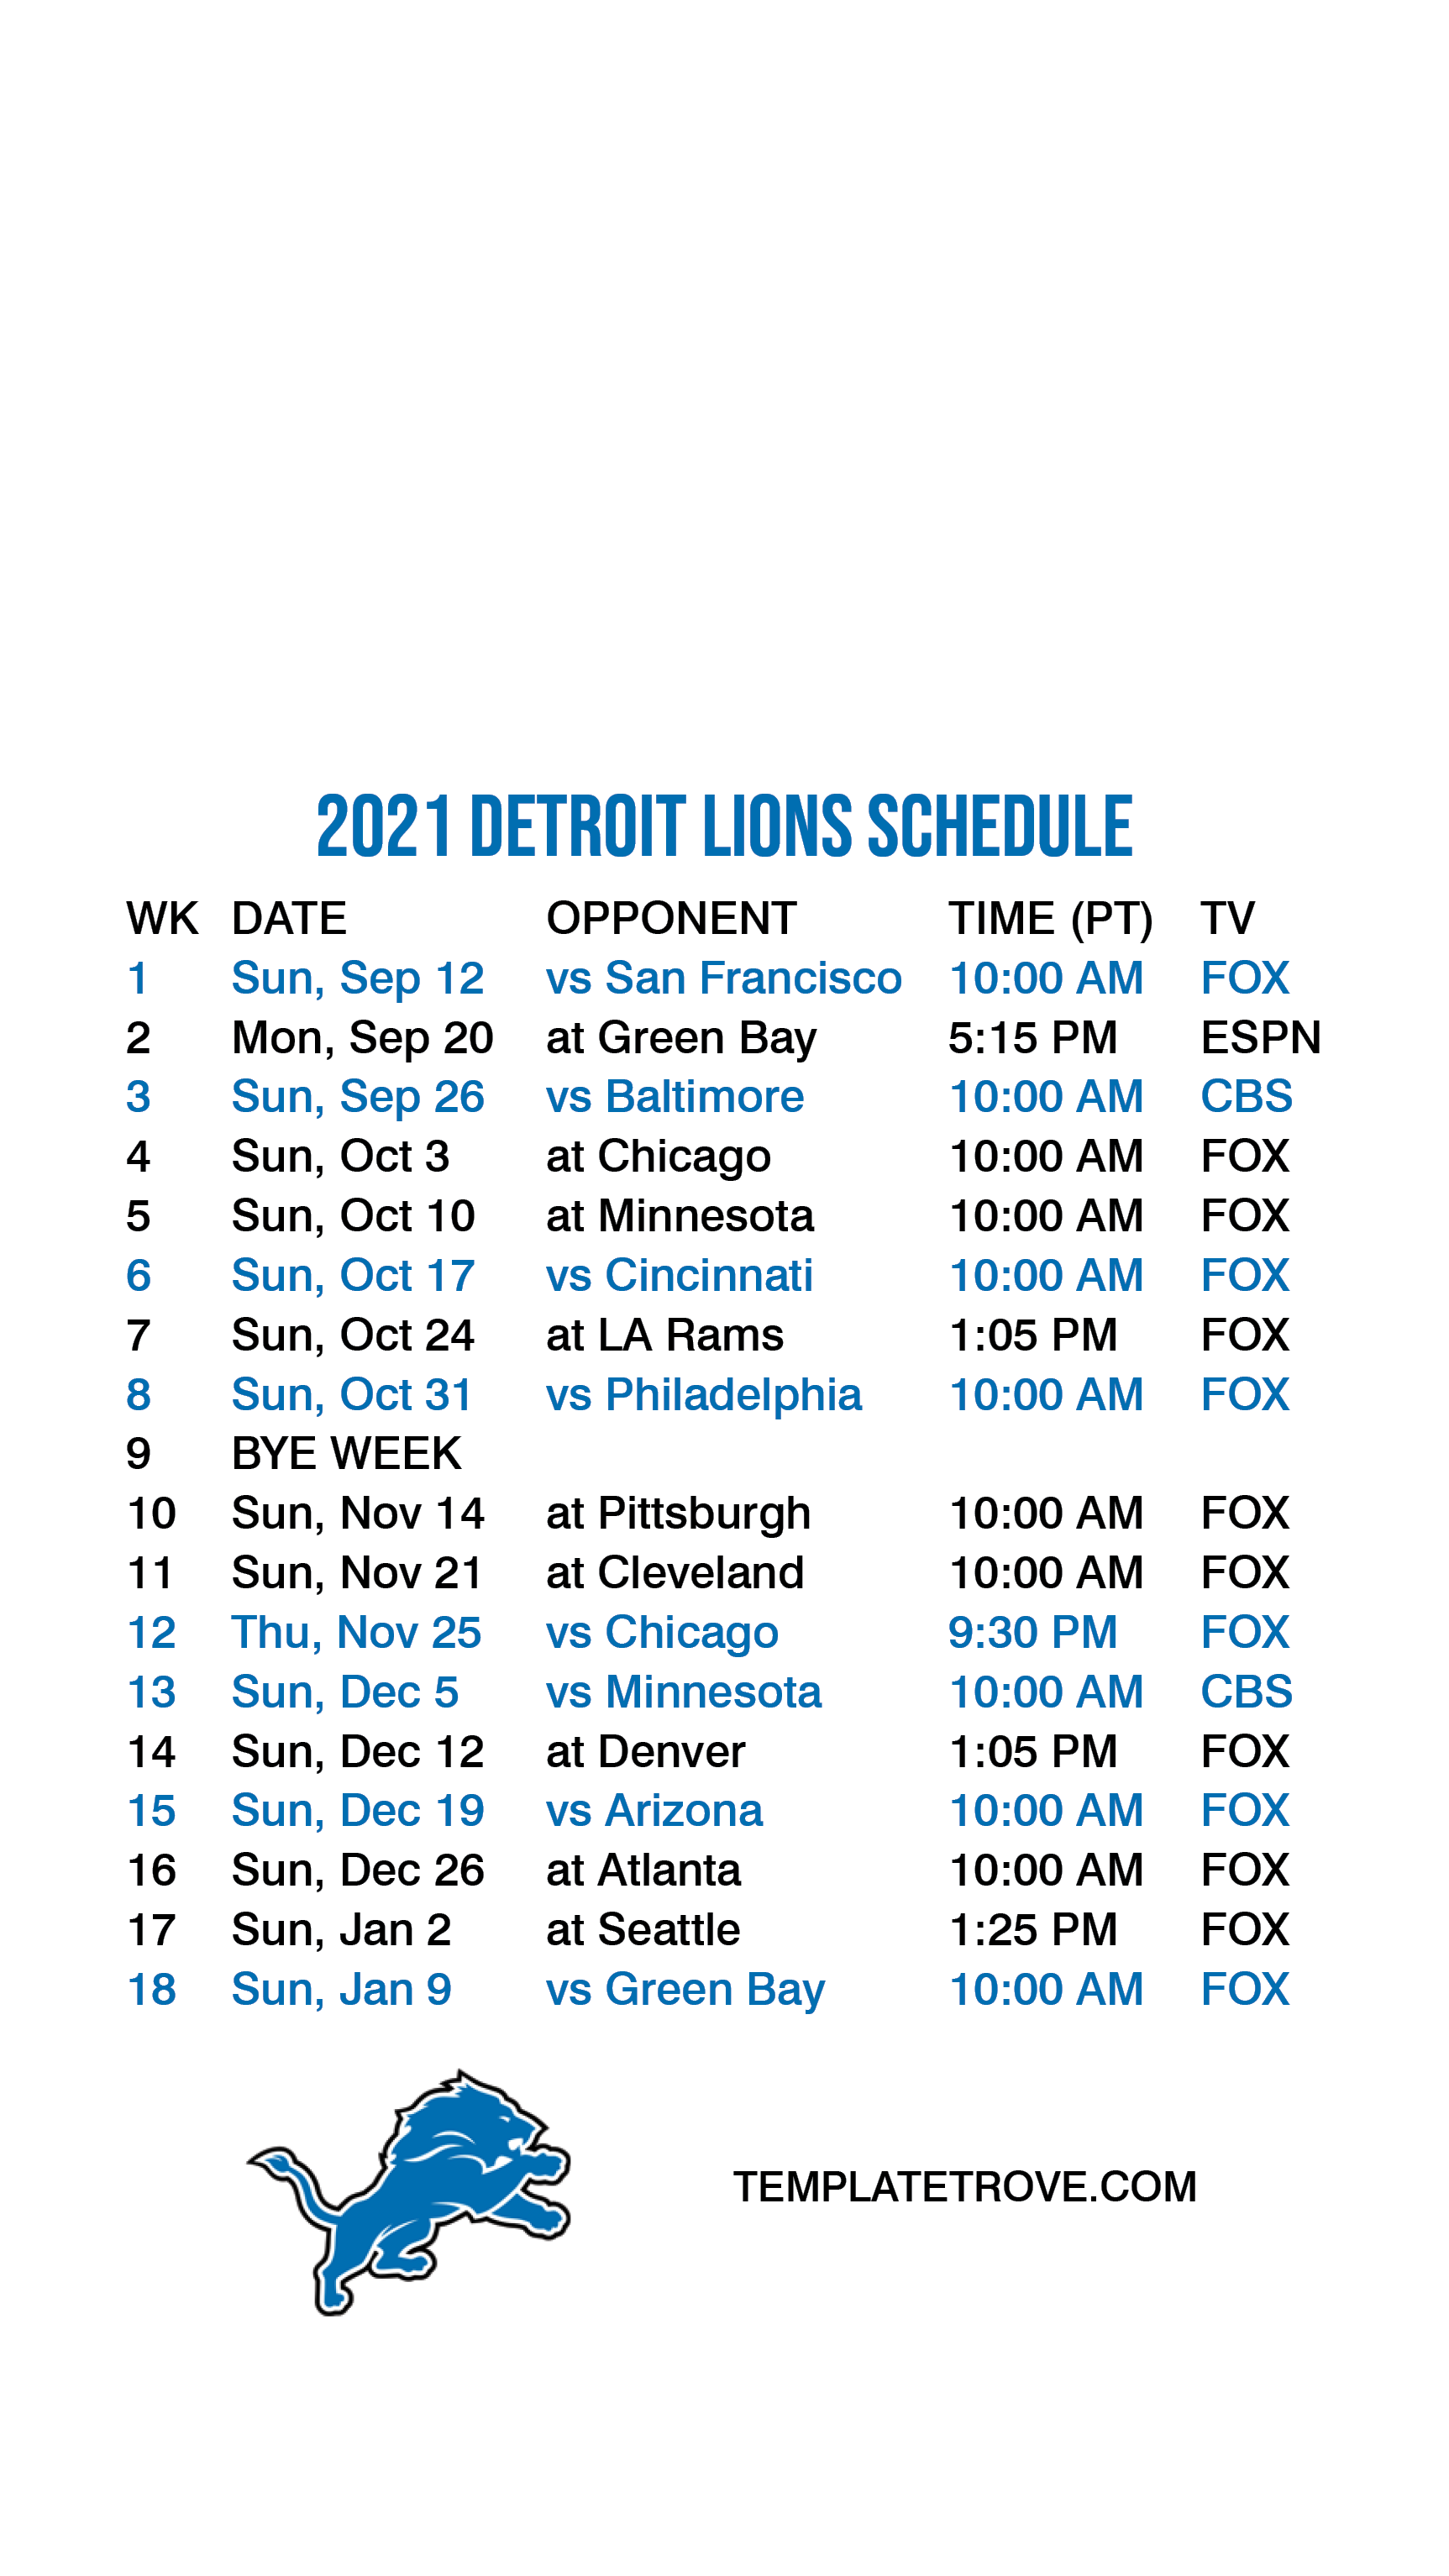 2021 2022 Detroit Lions Lock Screen Schedule For IPhone 6 